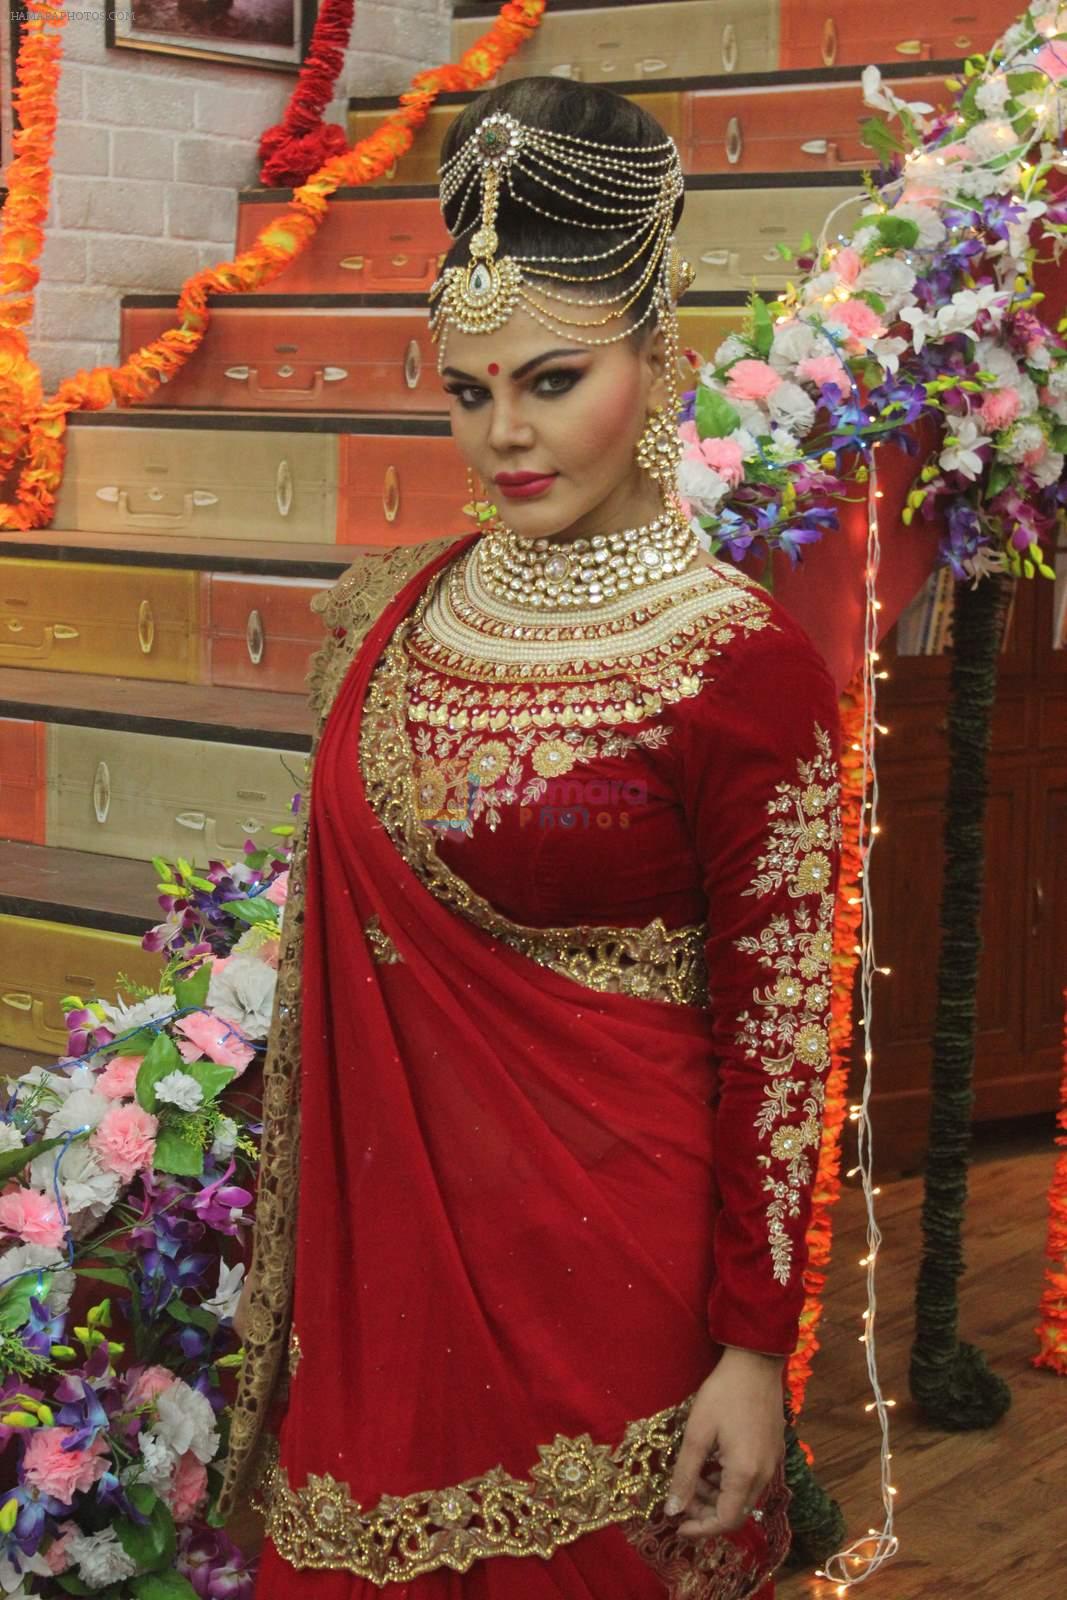 Rakhi sawant on the sets of comedy class on 24th July 2015